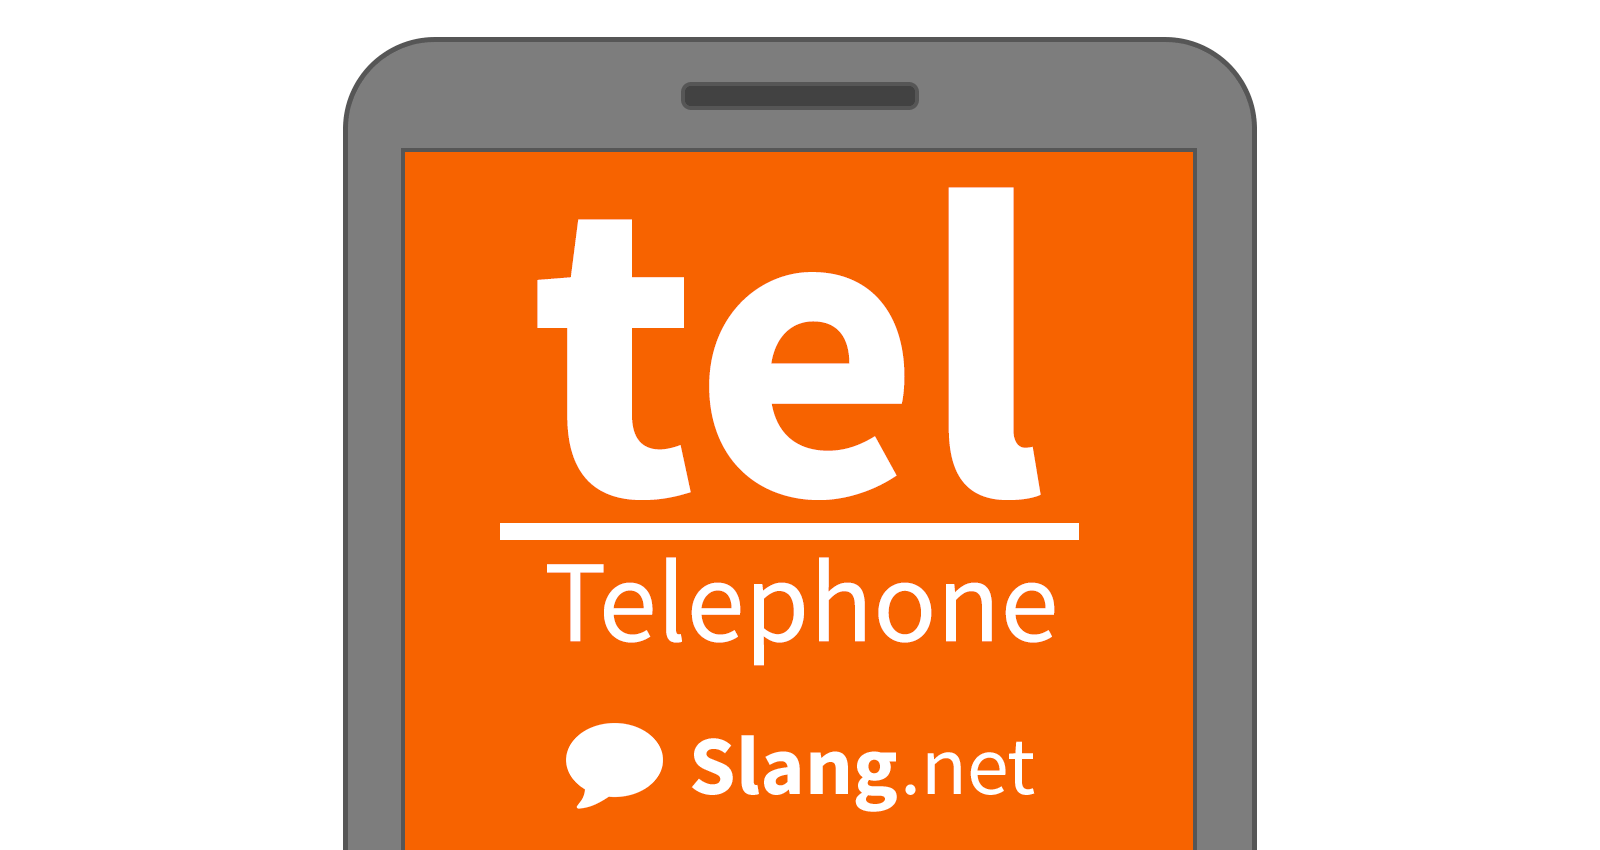 People often use tel in messages and emails